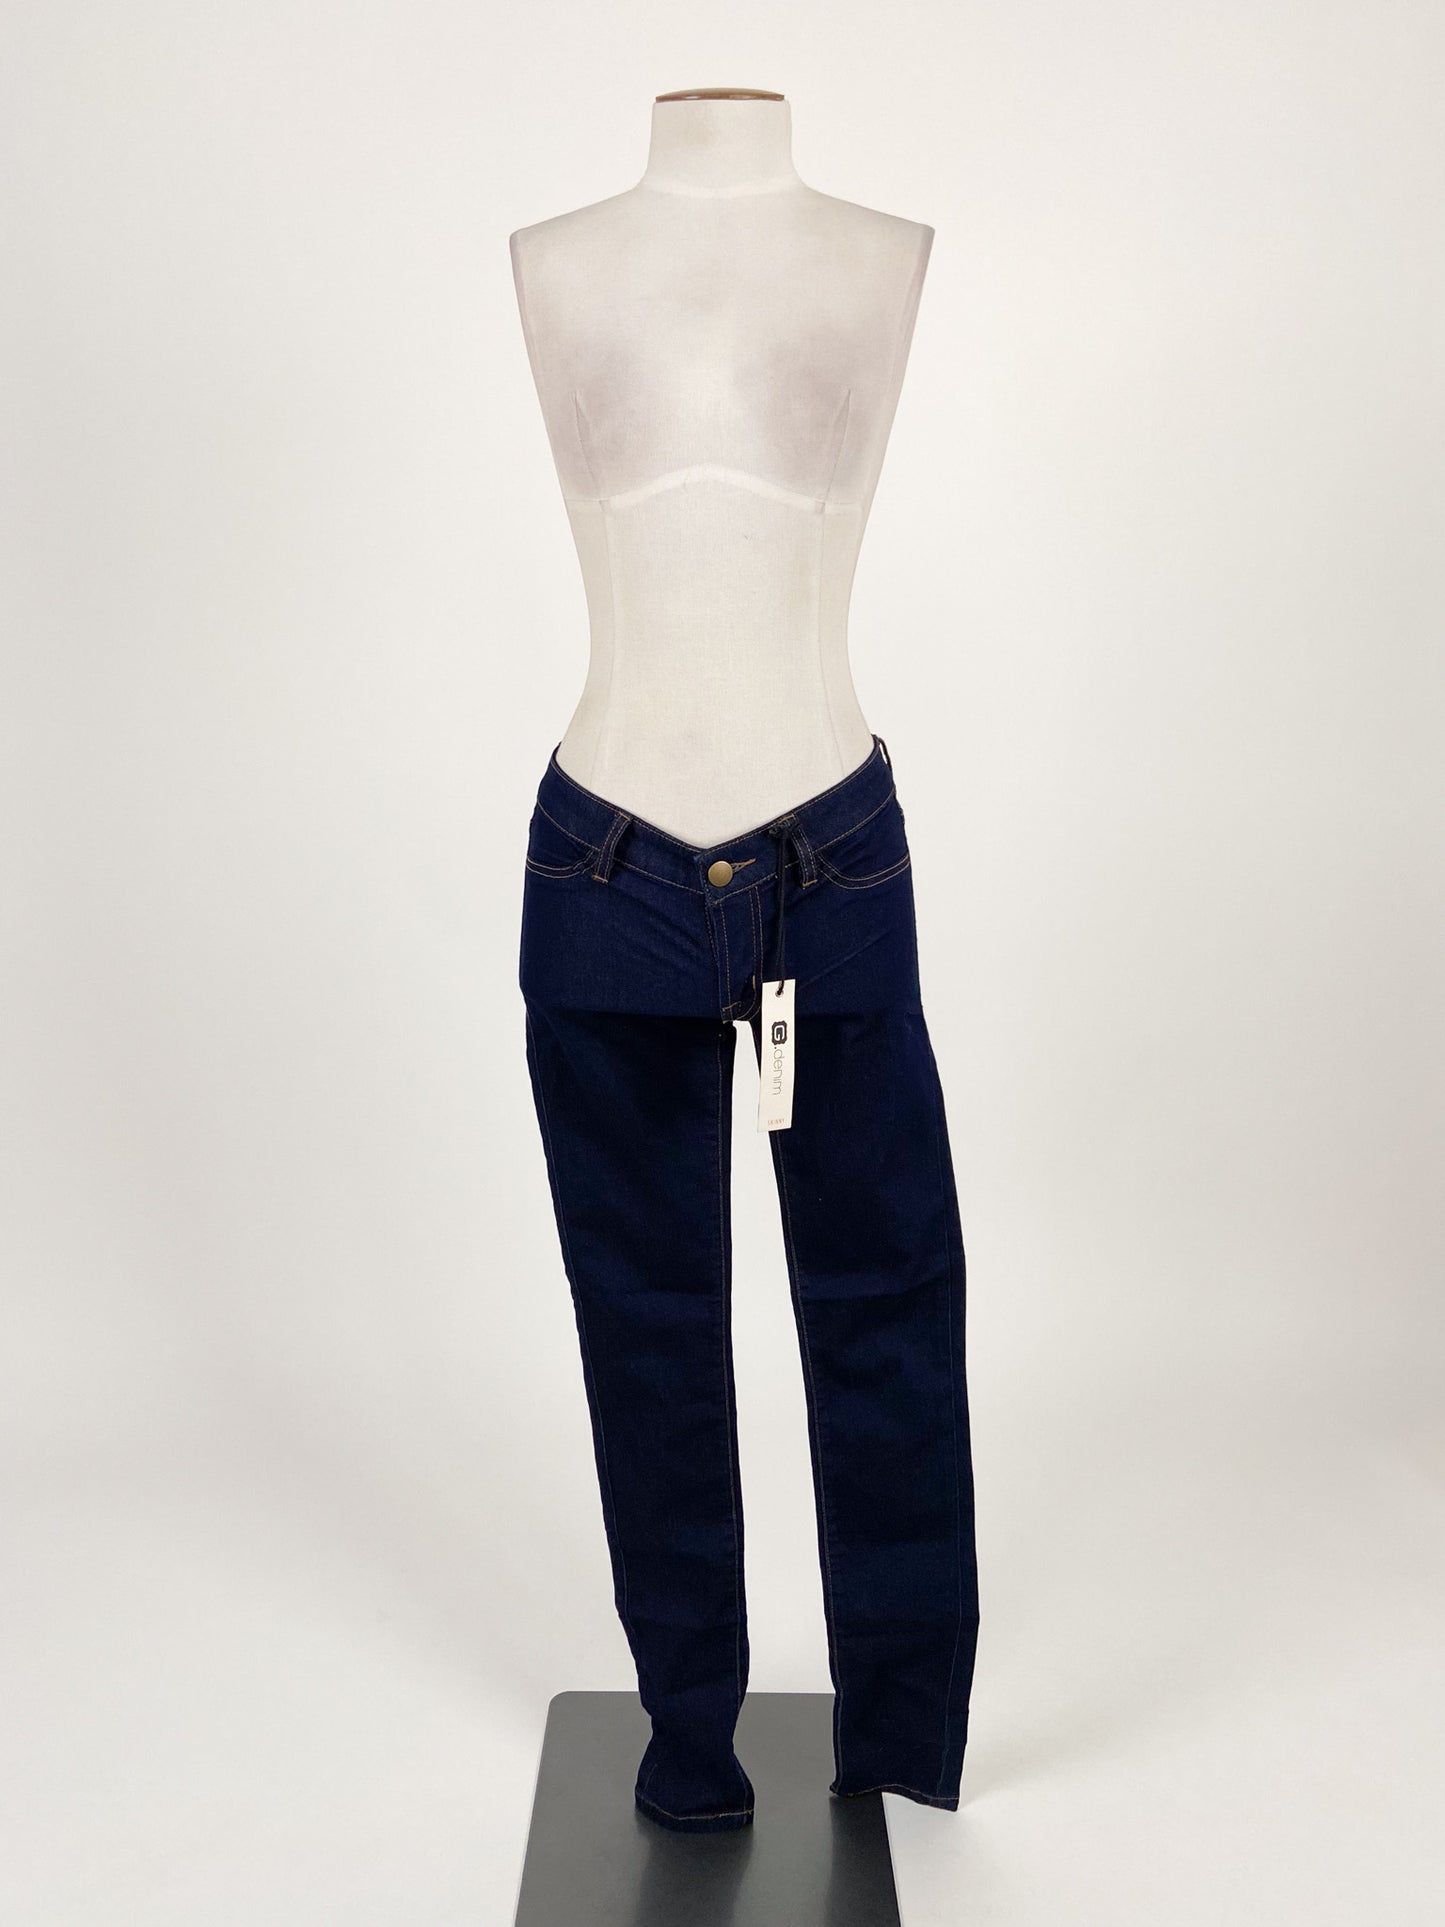 Glassons | Blue Casual Jeans | Size 8